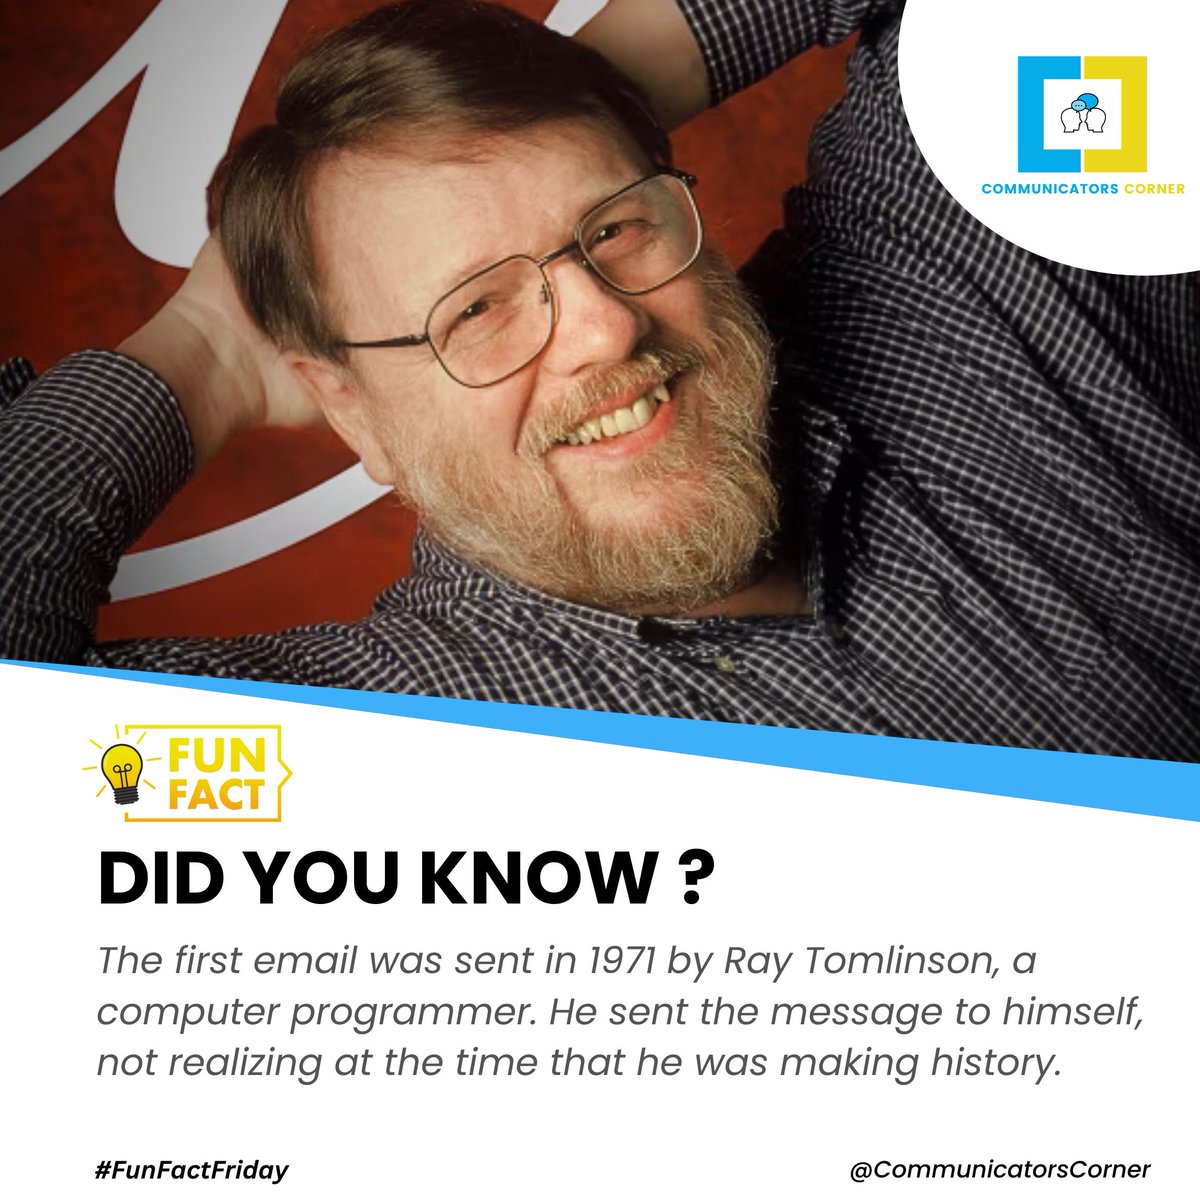 Did you know?

In 1971, Ray Tomlinson, a computer programmer, sent the first email to himself, unknowingly making history! 😁🌟

#EmailHistory
#FunFactFriday
#CommunicatorsCorner